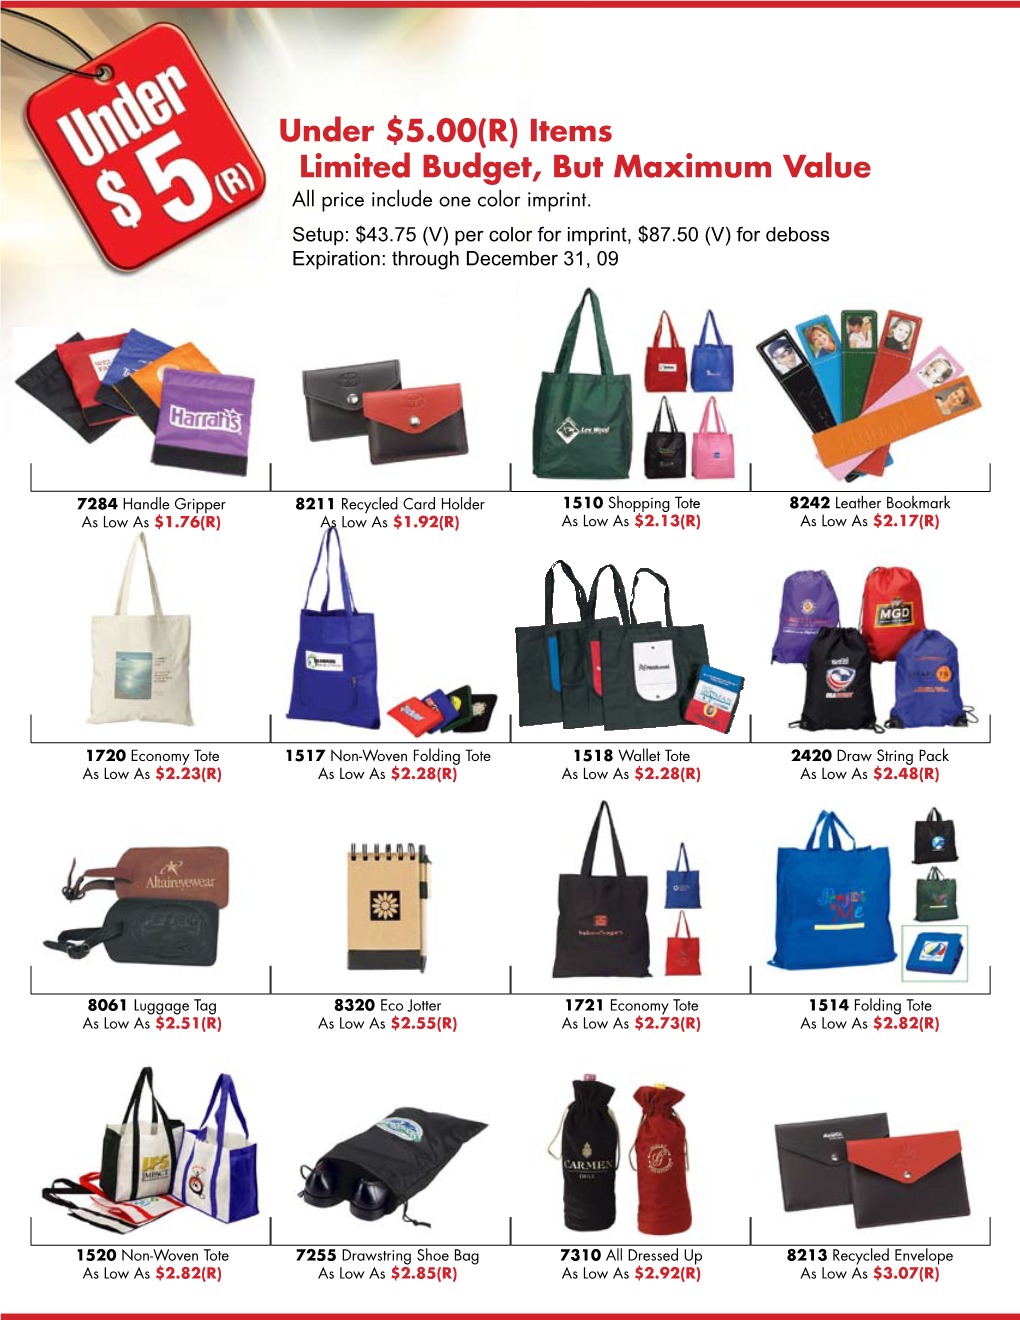 Under $5.00(R) Items Limited Budget, but Maximum Value All Price Include One Color Imprint